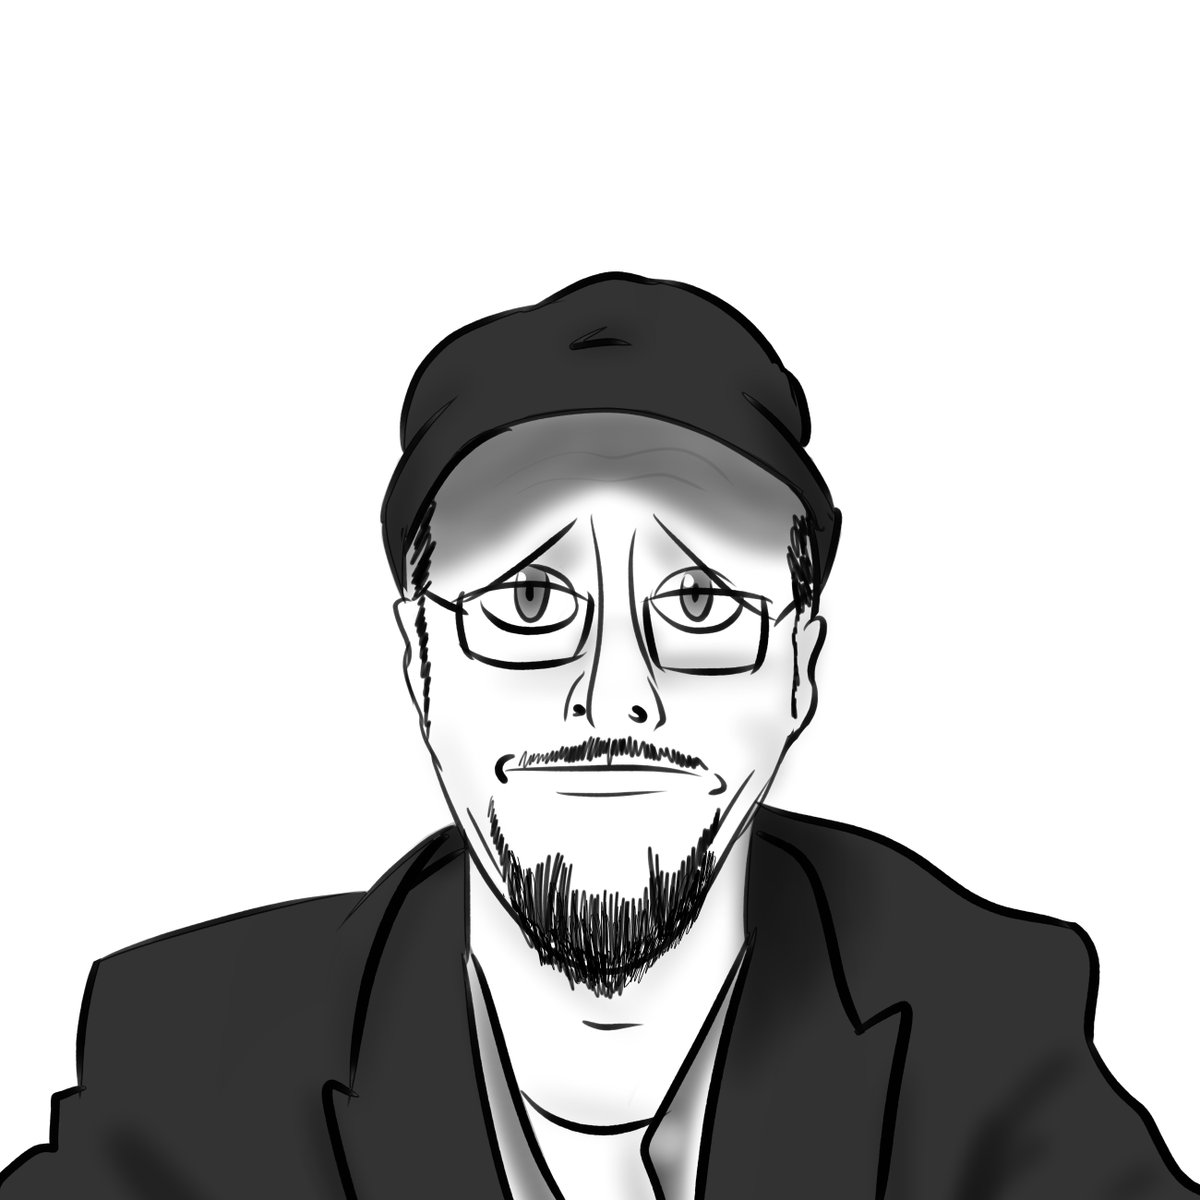 Felt like drawing a quick Nostalgia Critic doodle after watching too many old reviews

#nostalgiacritic